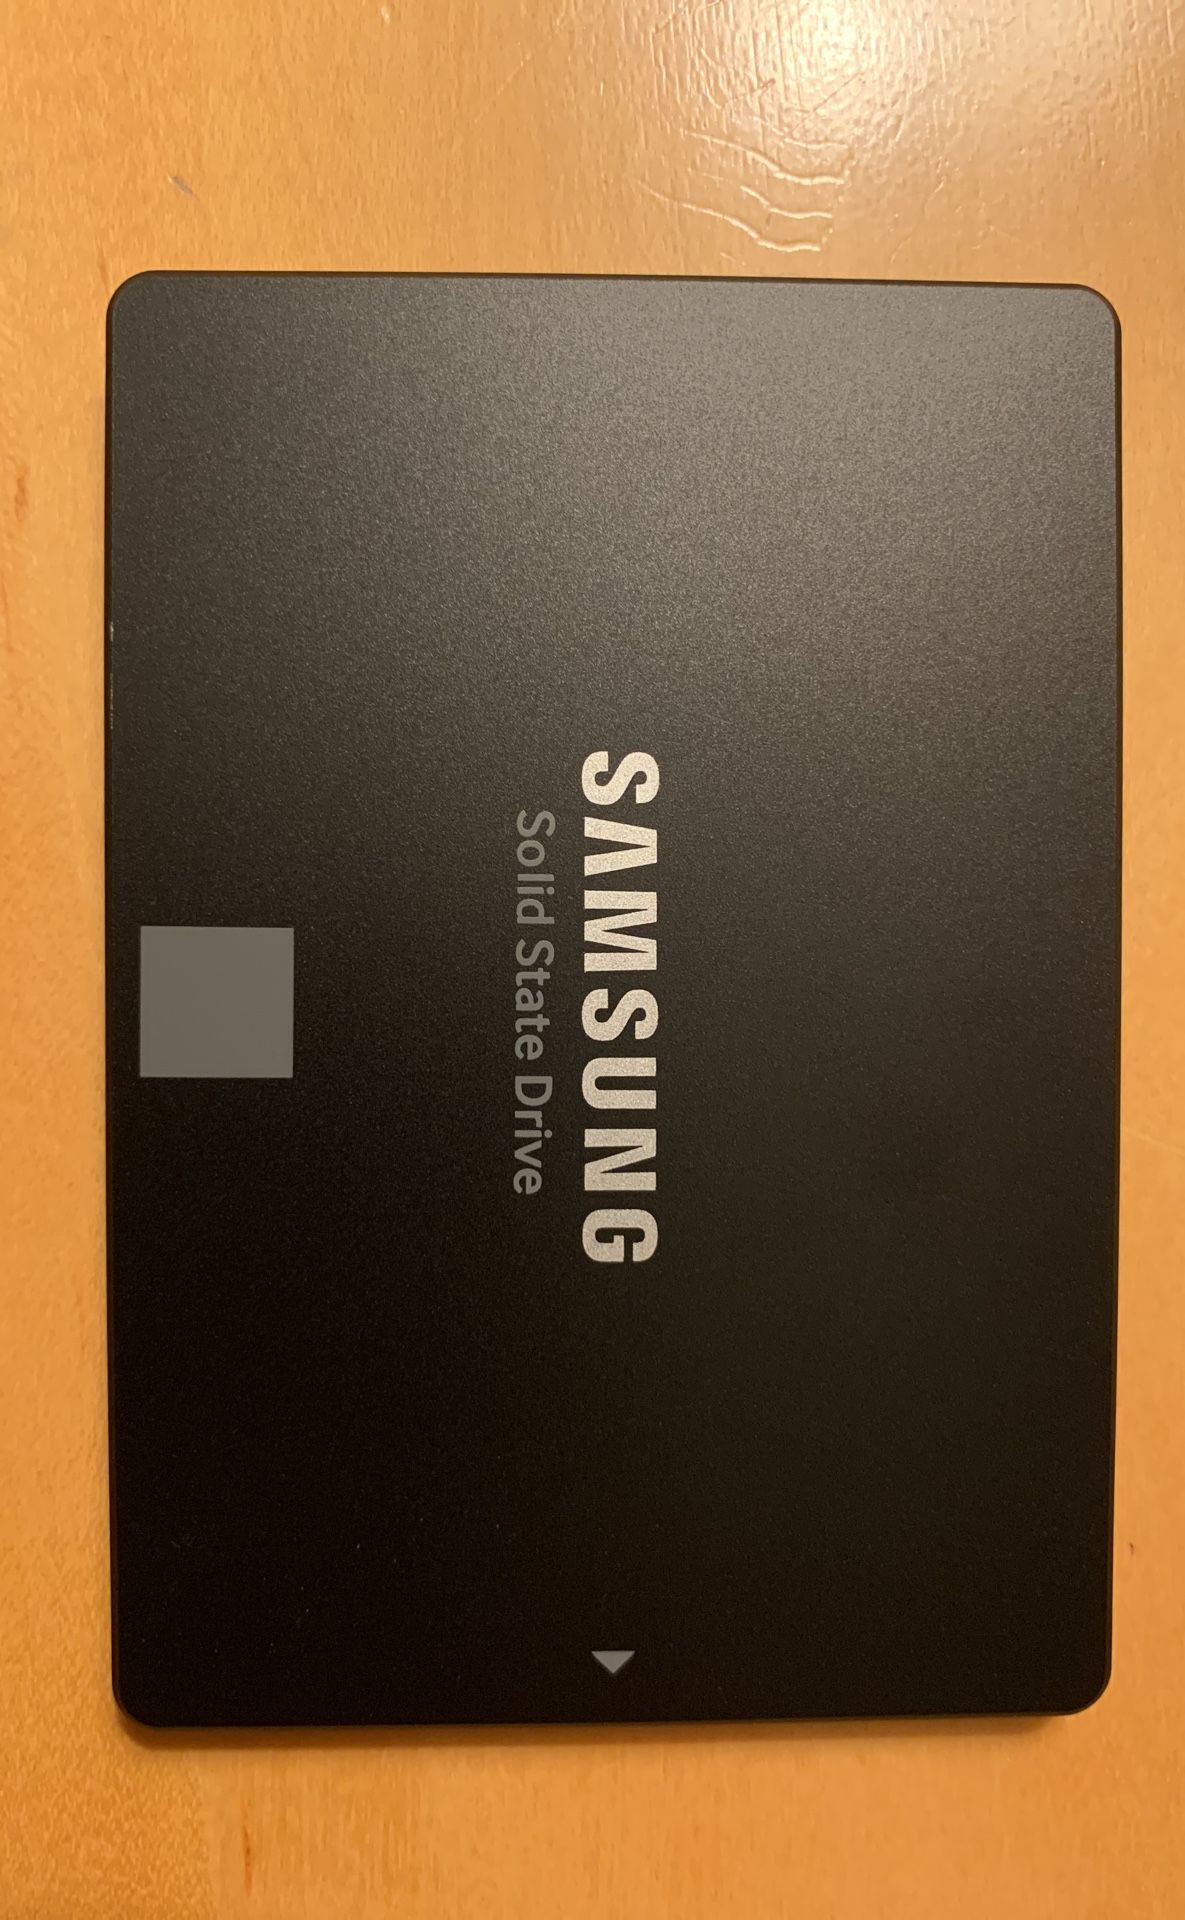 Samsung Solid State Drive SSD 500 GB, 2.5” SATa for Desktop, Laptop